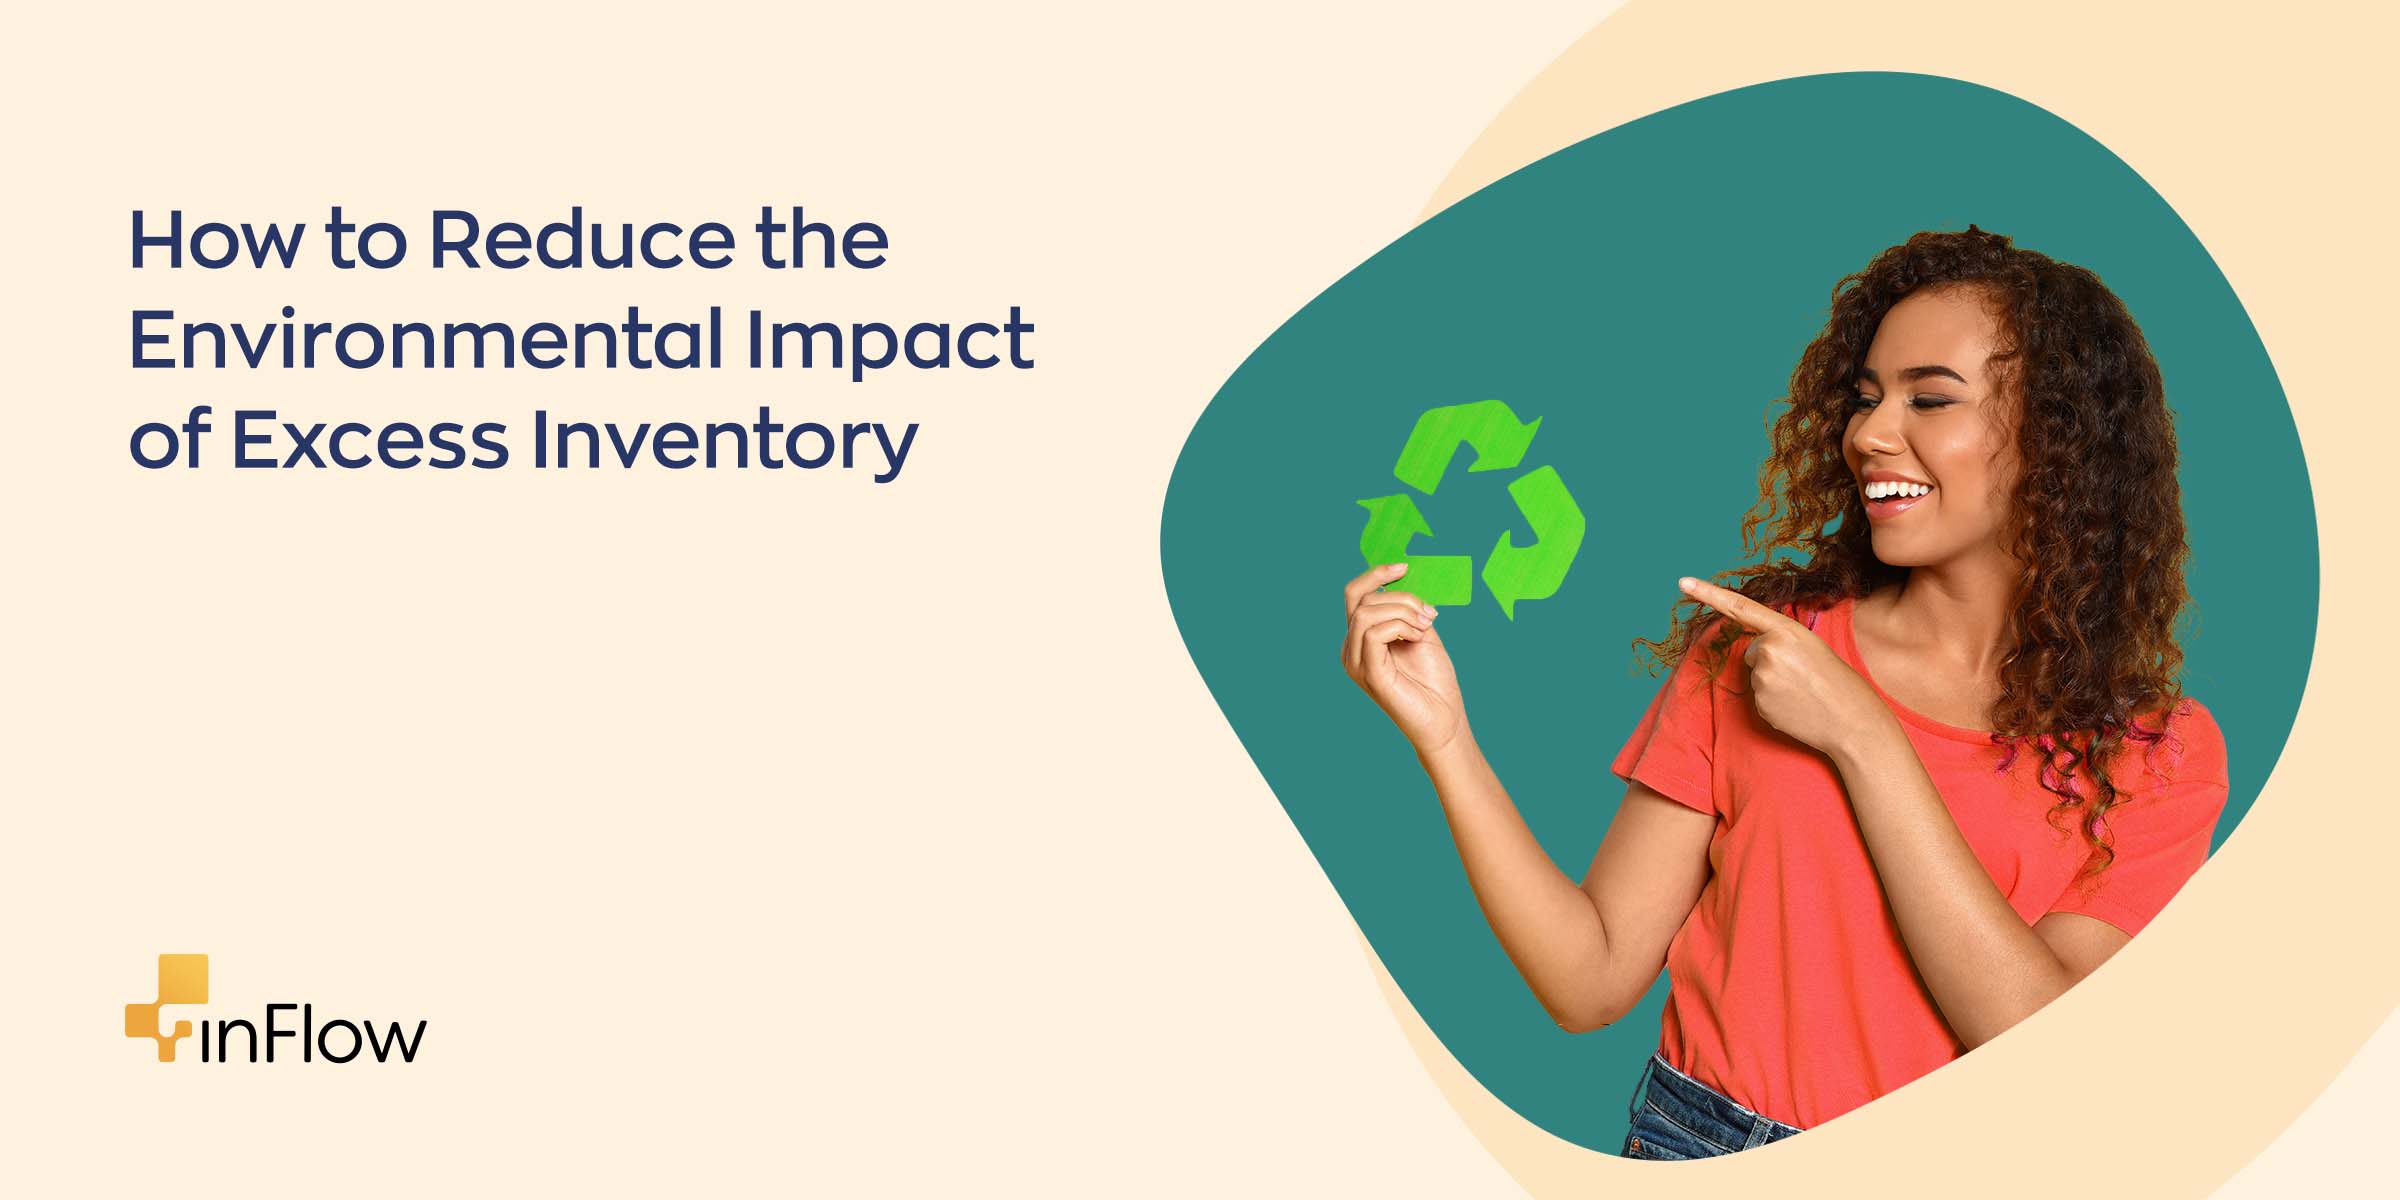 How to Reduce the Environmental Impact of Excess Inventory